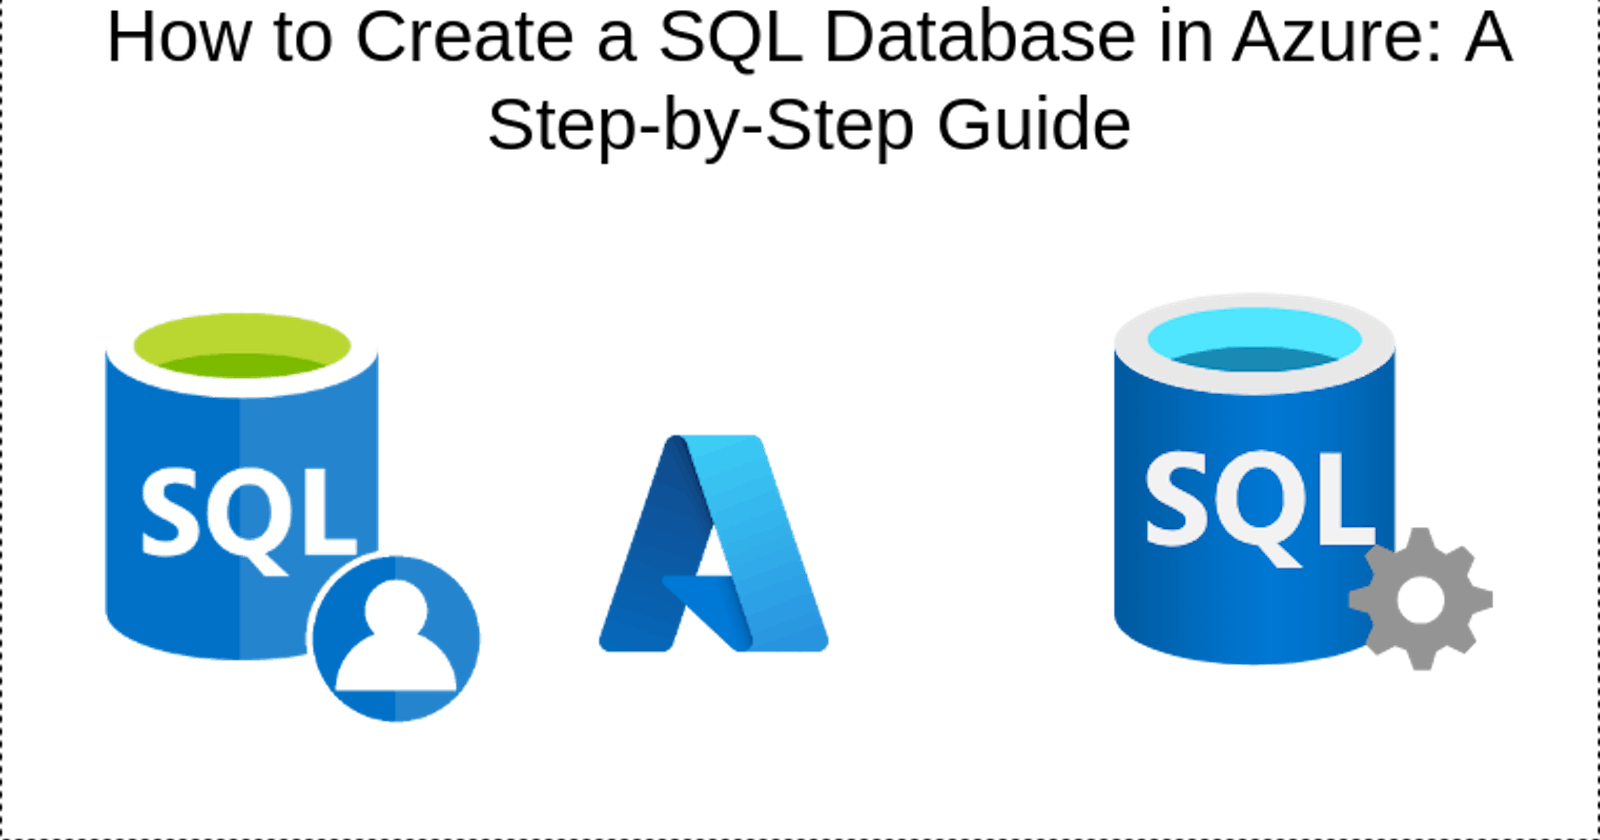 How to Create a SQL Database in Azure: A Step-by-Step Guide